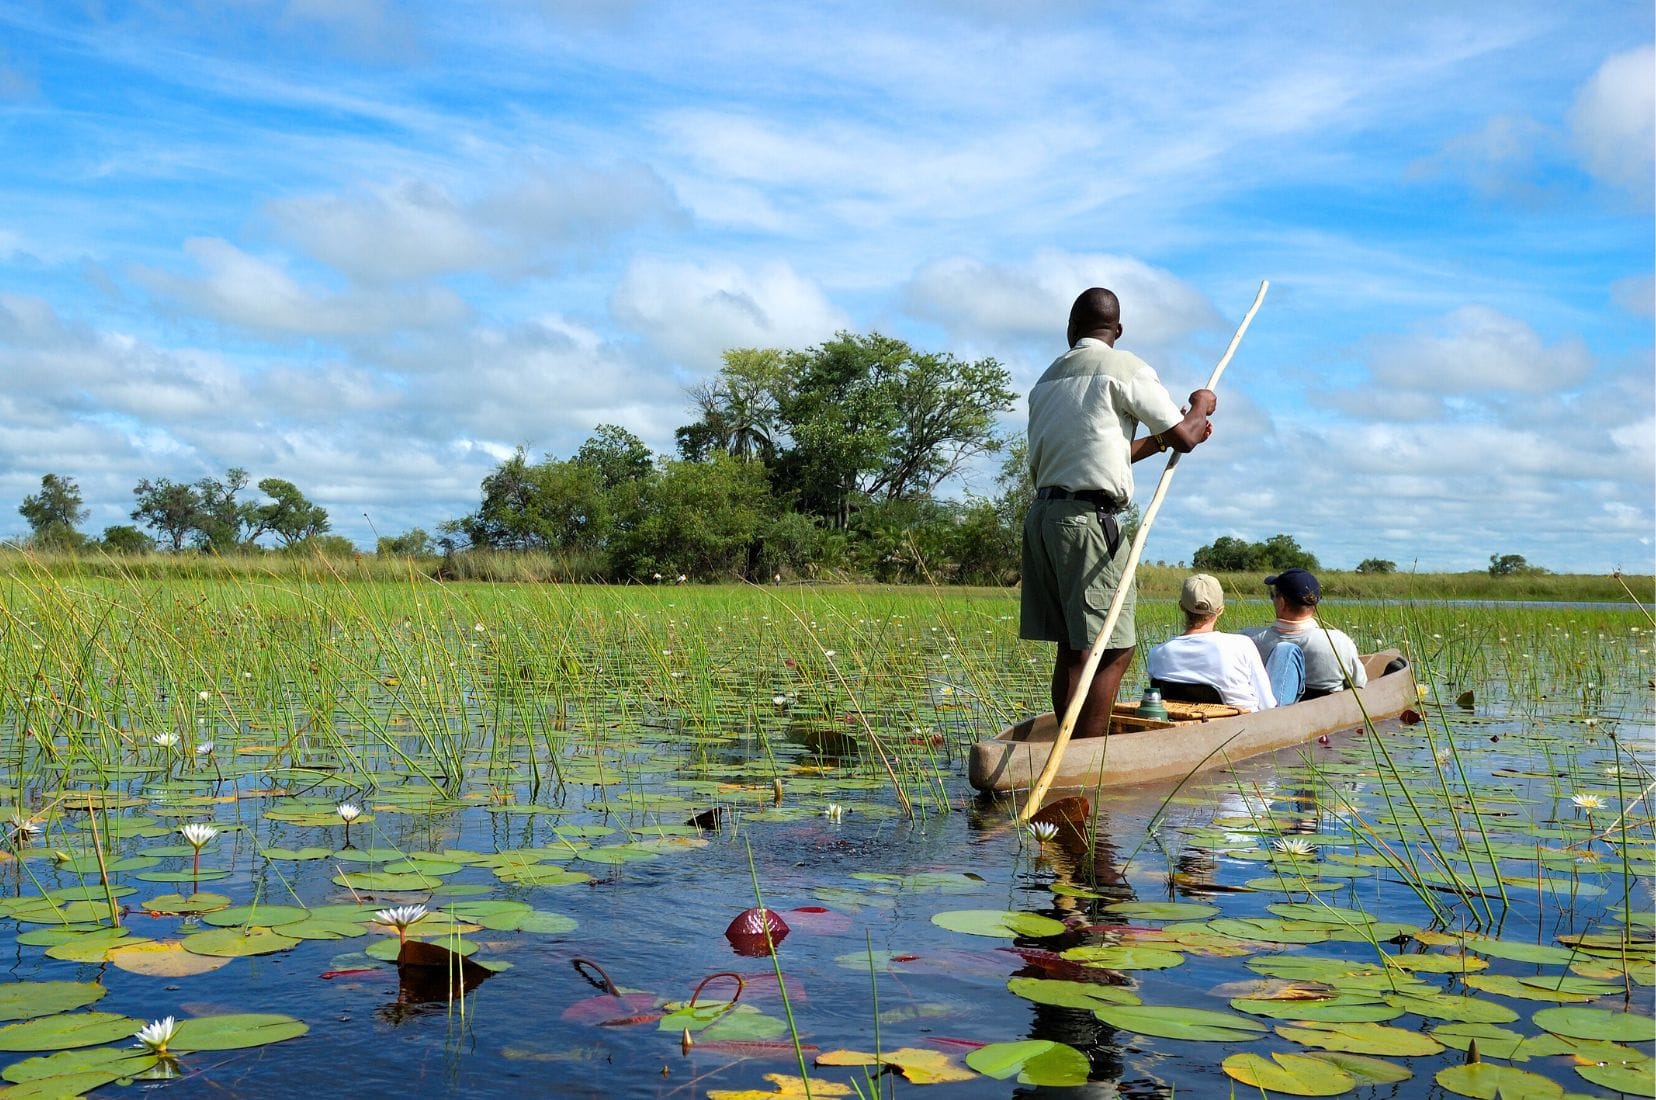 a couple riding in a mokoro - a dug out canoe - with a poler stood at the stern steering through the Okavango waterways filled with waterlillies